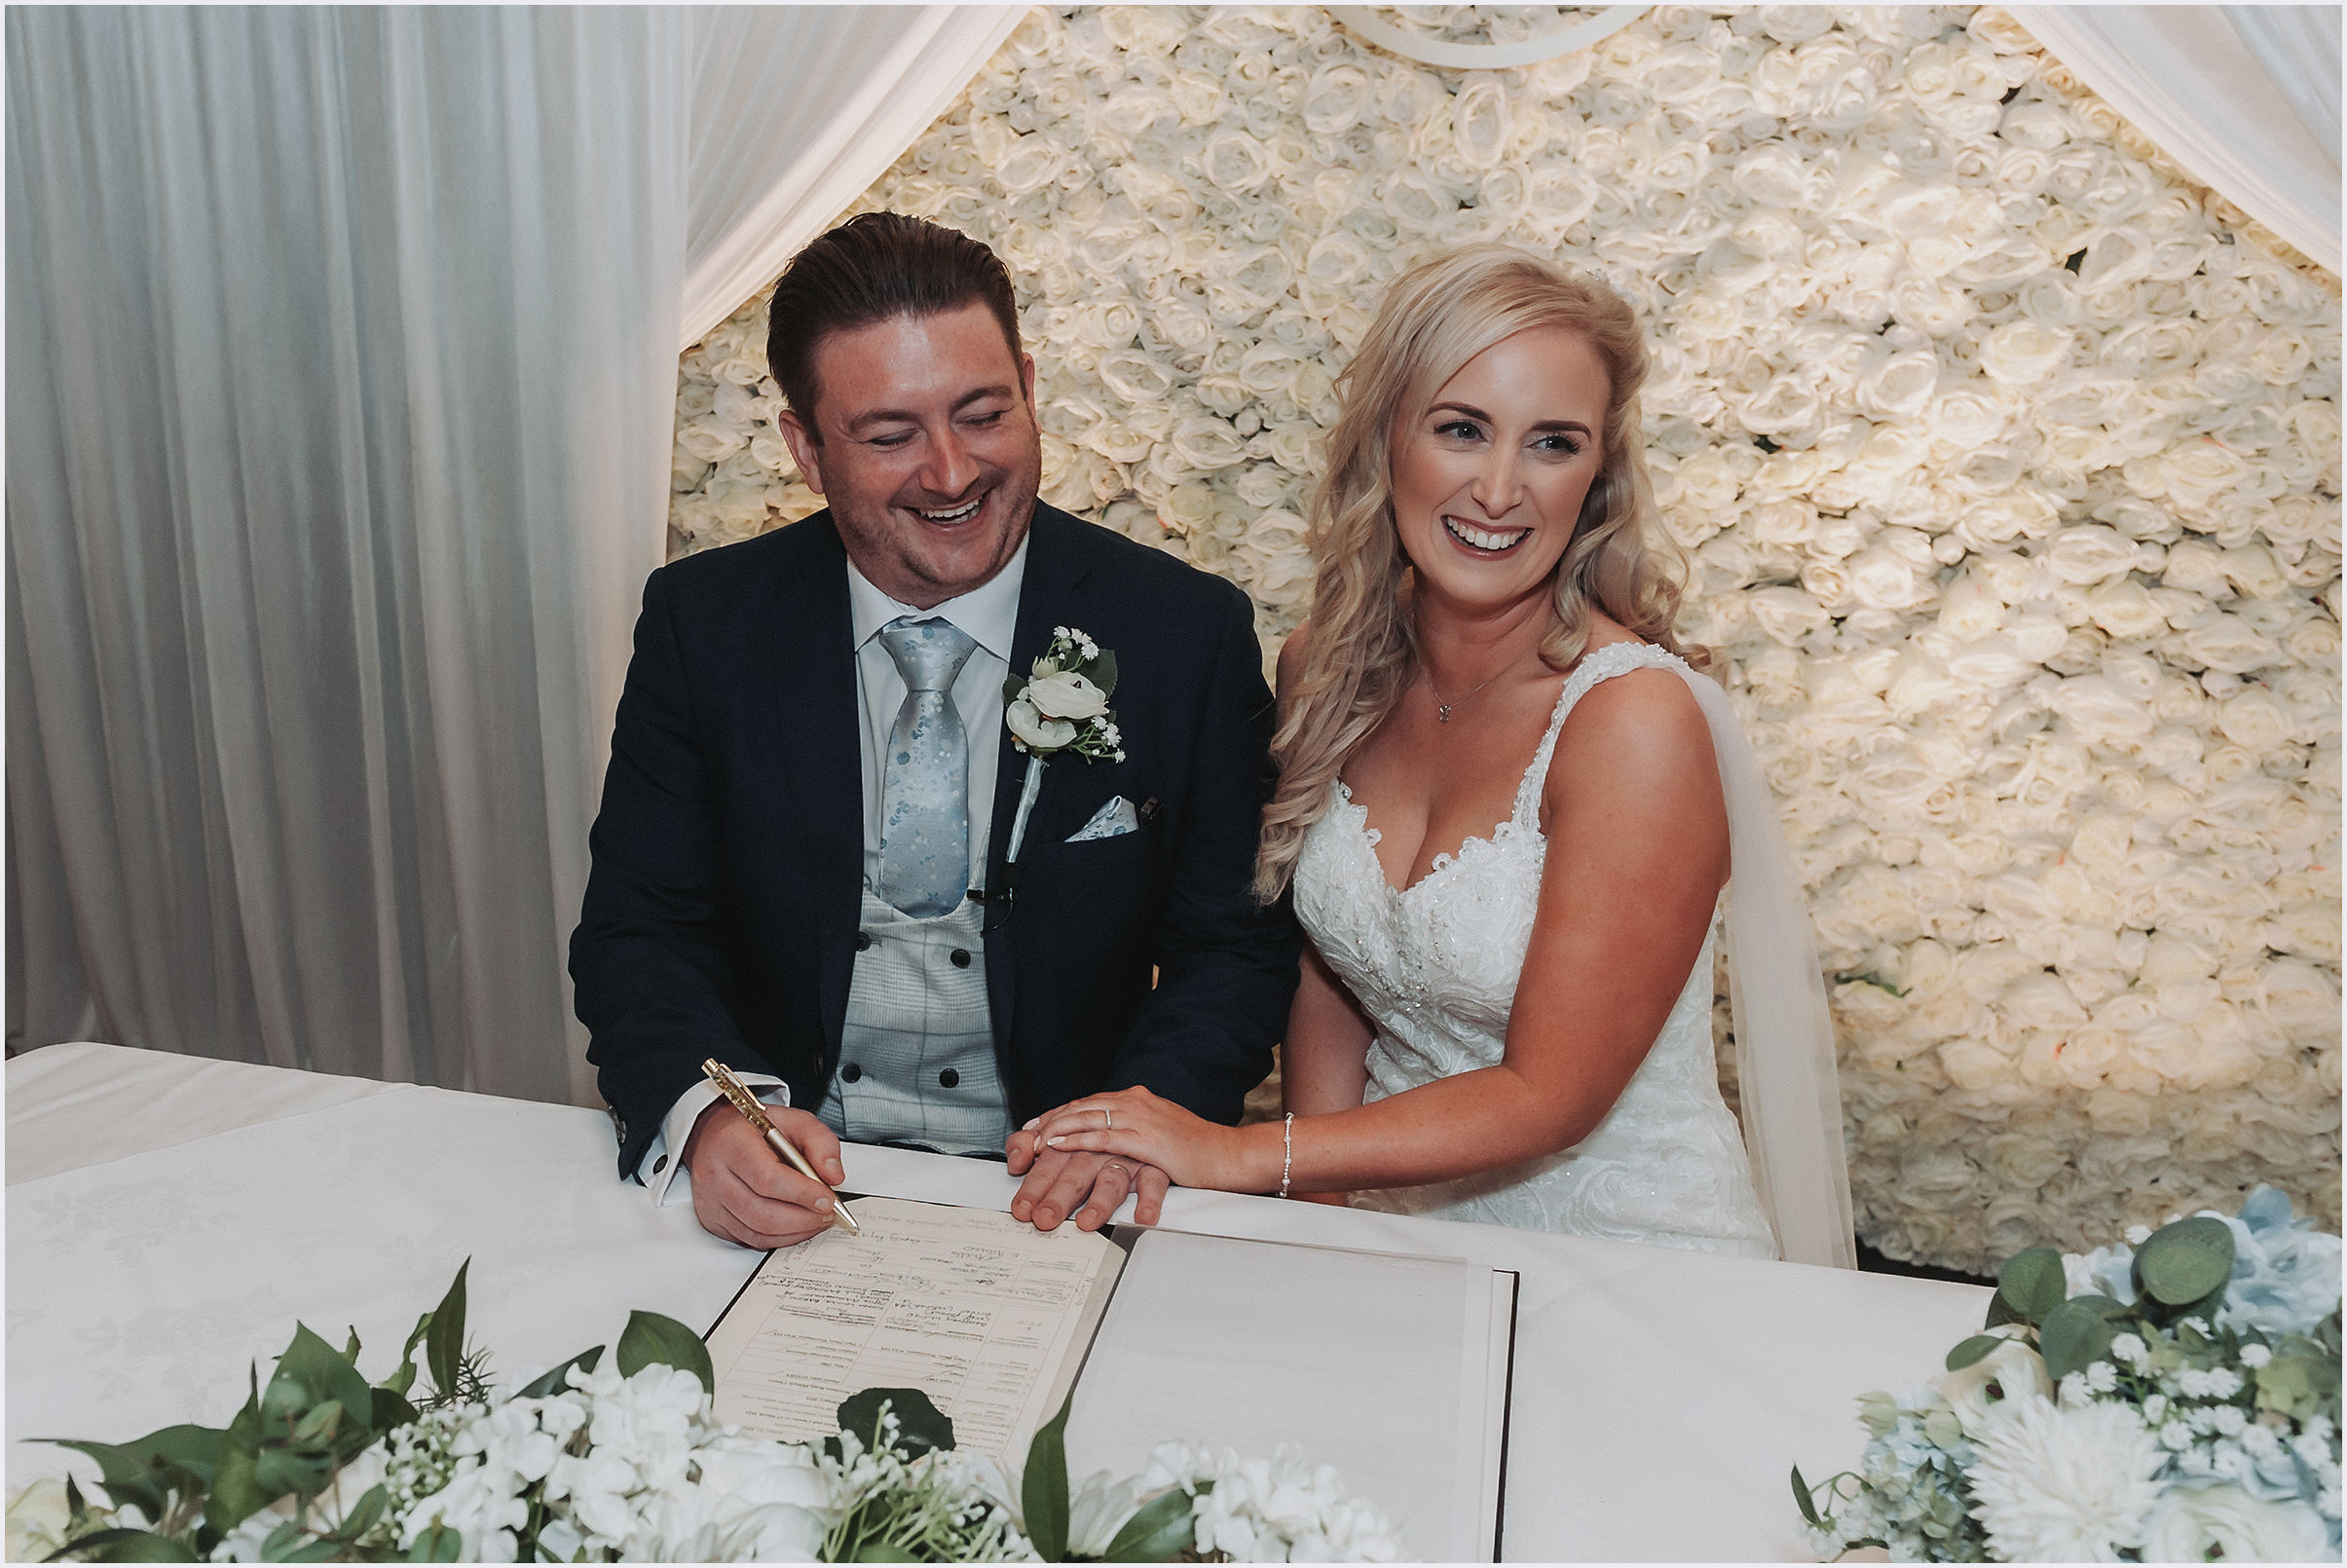 A bride gently rests her hand on her new husbands hand after signing the register at their wedding.  Both are laughing.